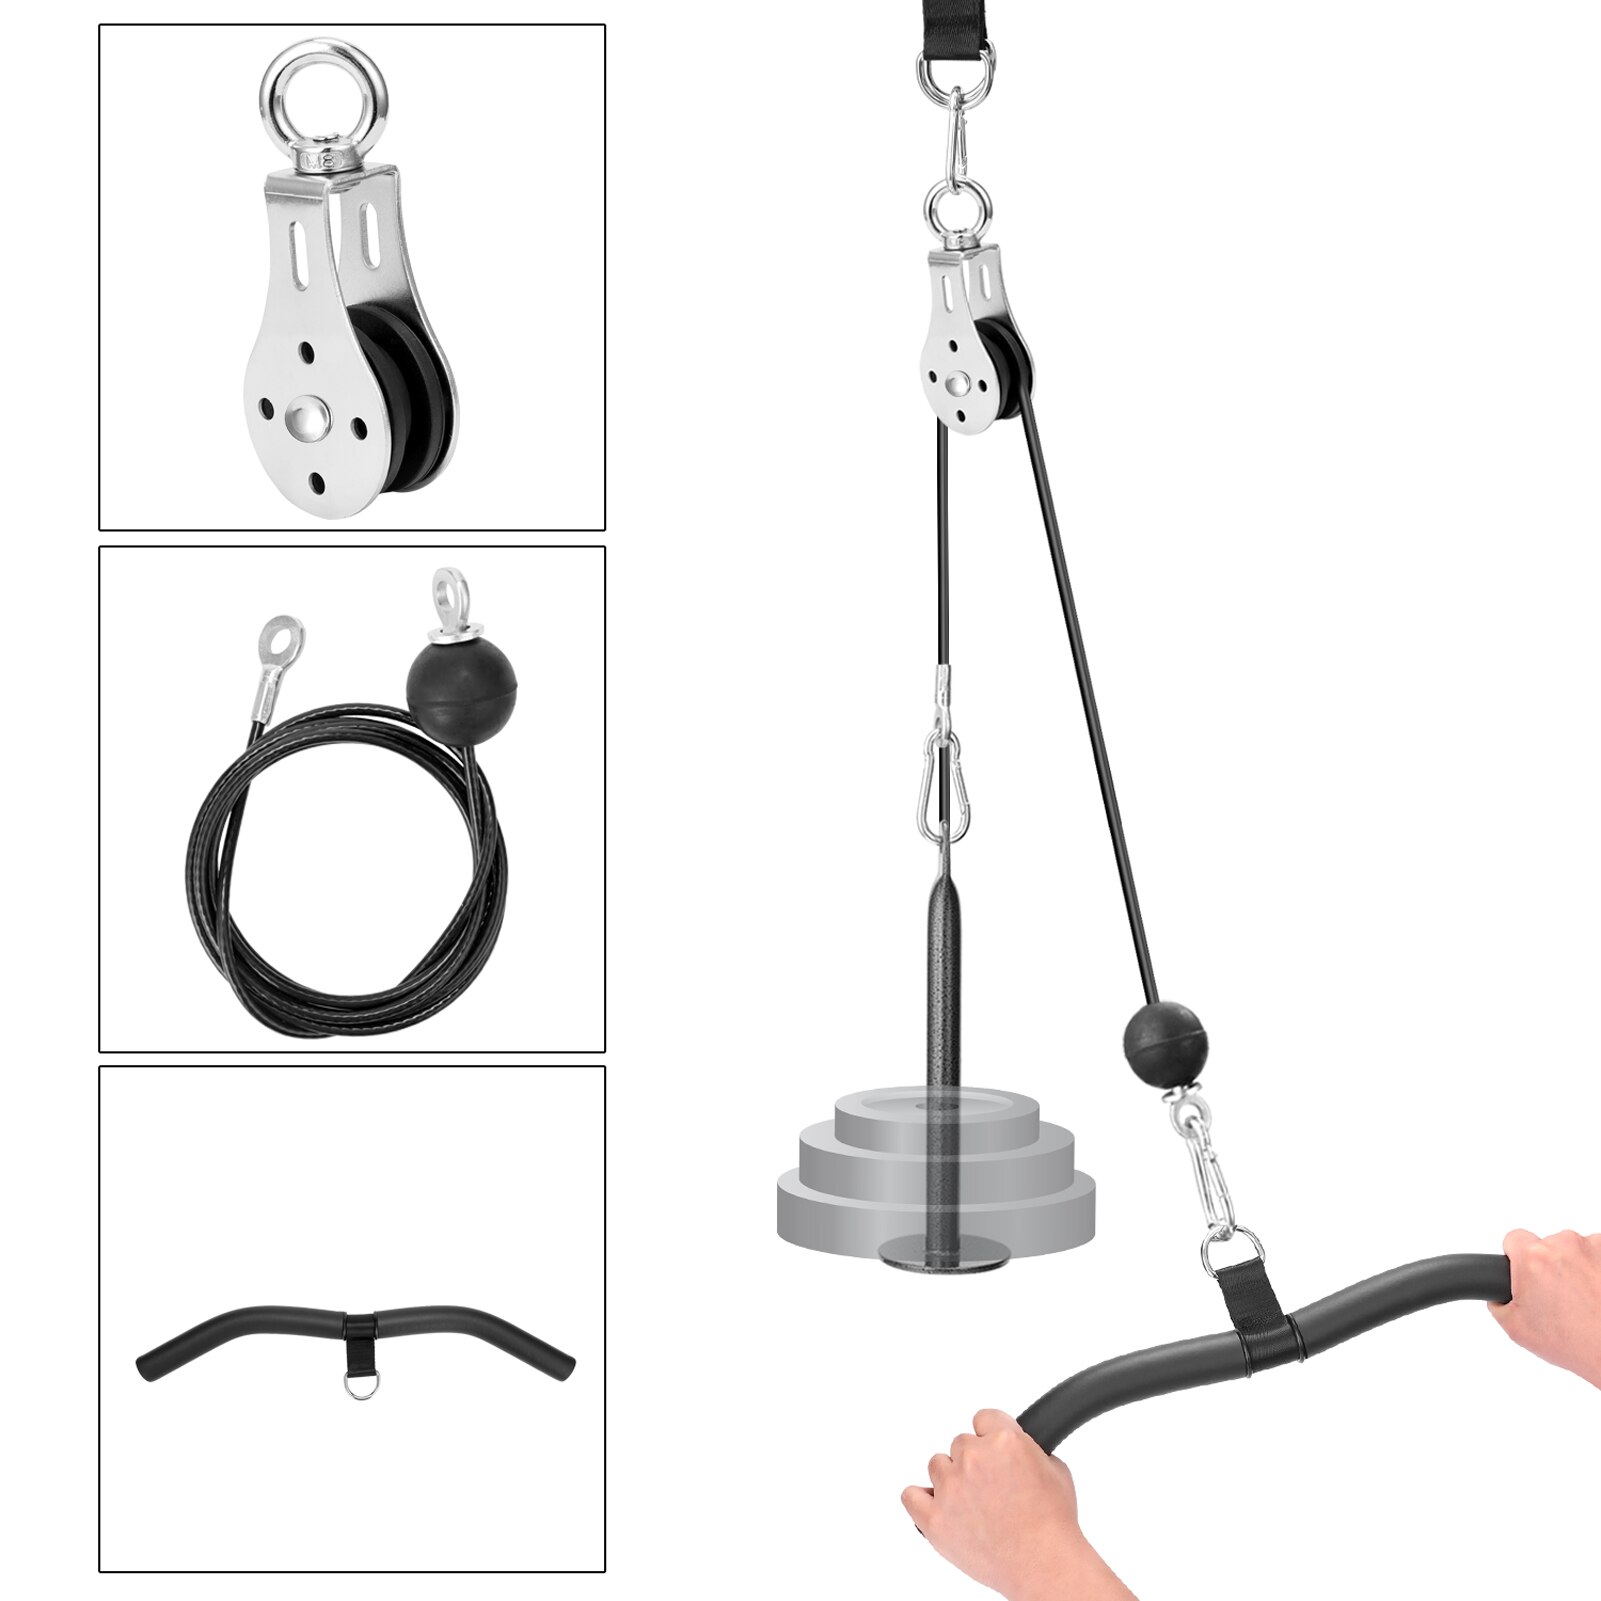 Gym Fitness DIY Pulley Cable Machine Attachments Pull Down Machine Full Set F1094 Back Muscle Biceps Triceps Blaster Trainer: Set C